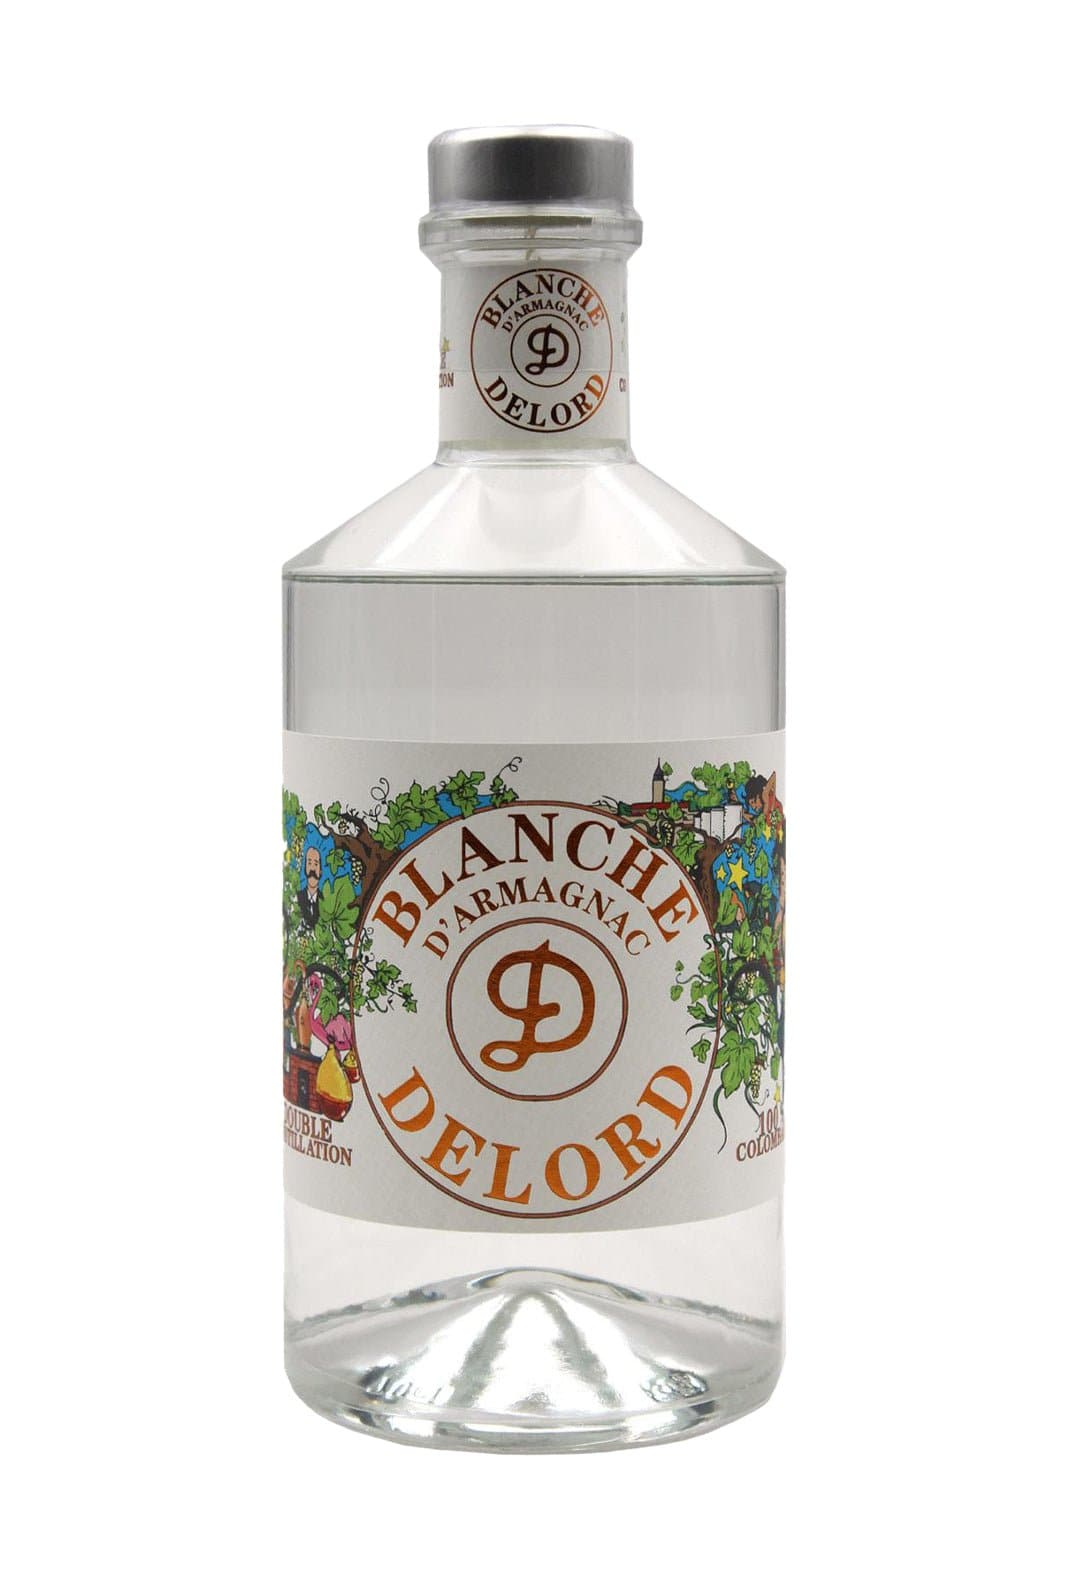 Delord Blanche d'Armagnac 42% 700ml | Brandy | Shop online at Spirits of France